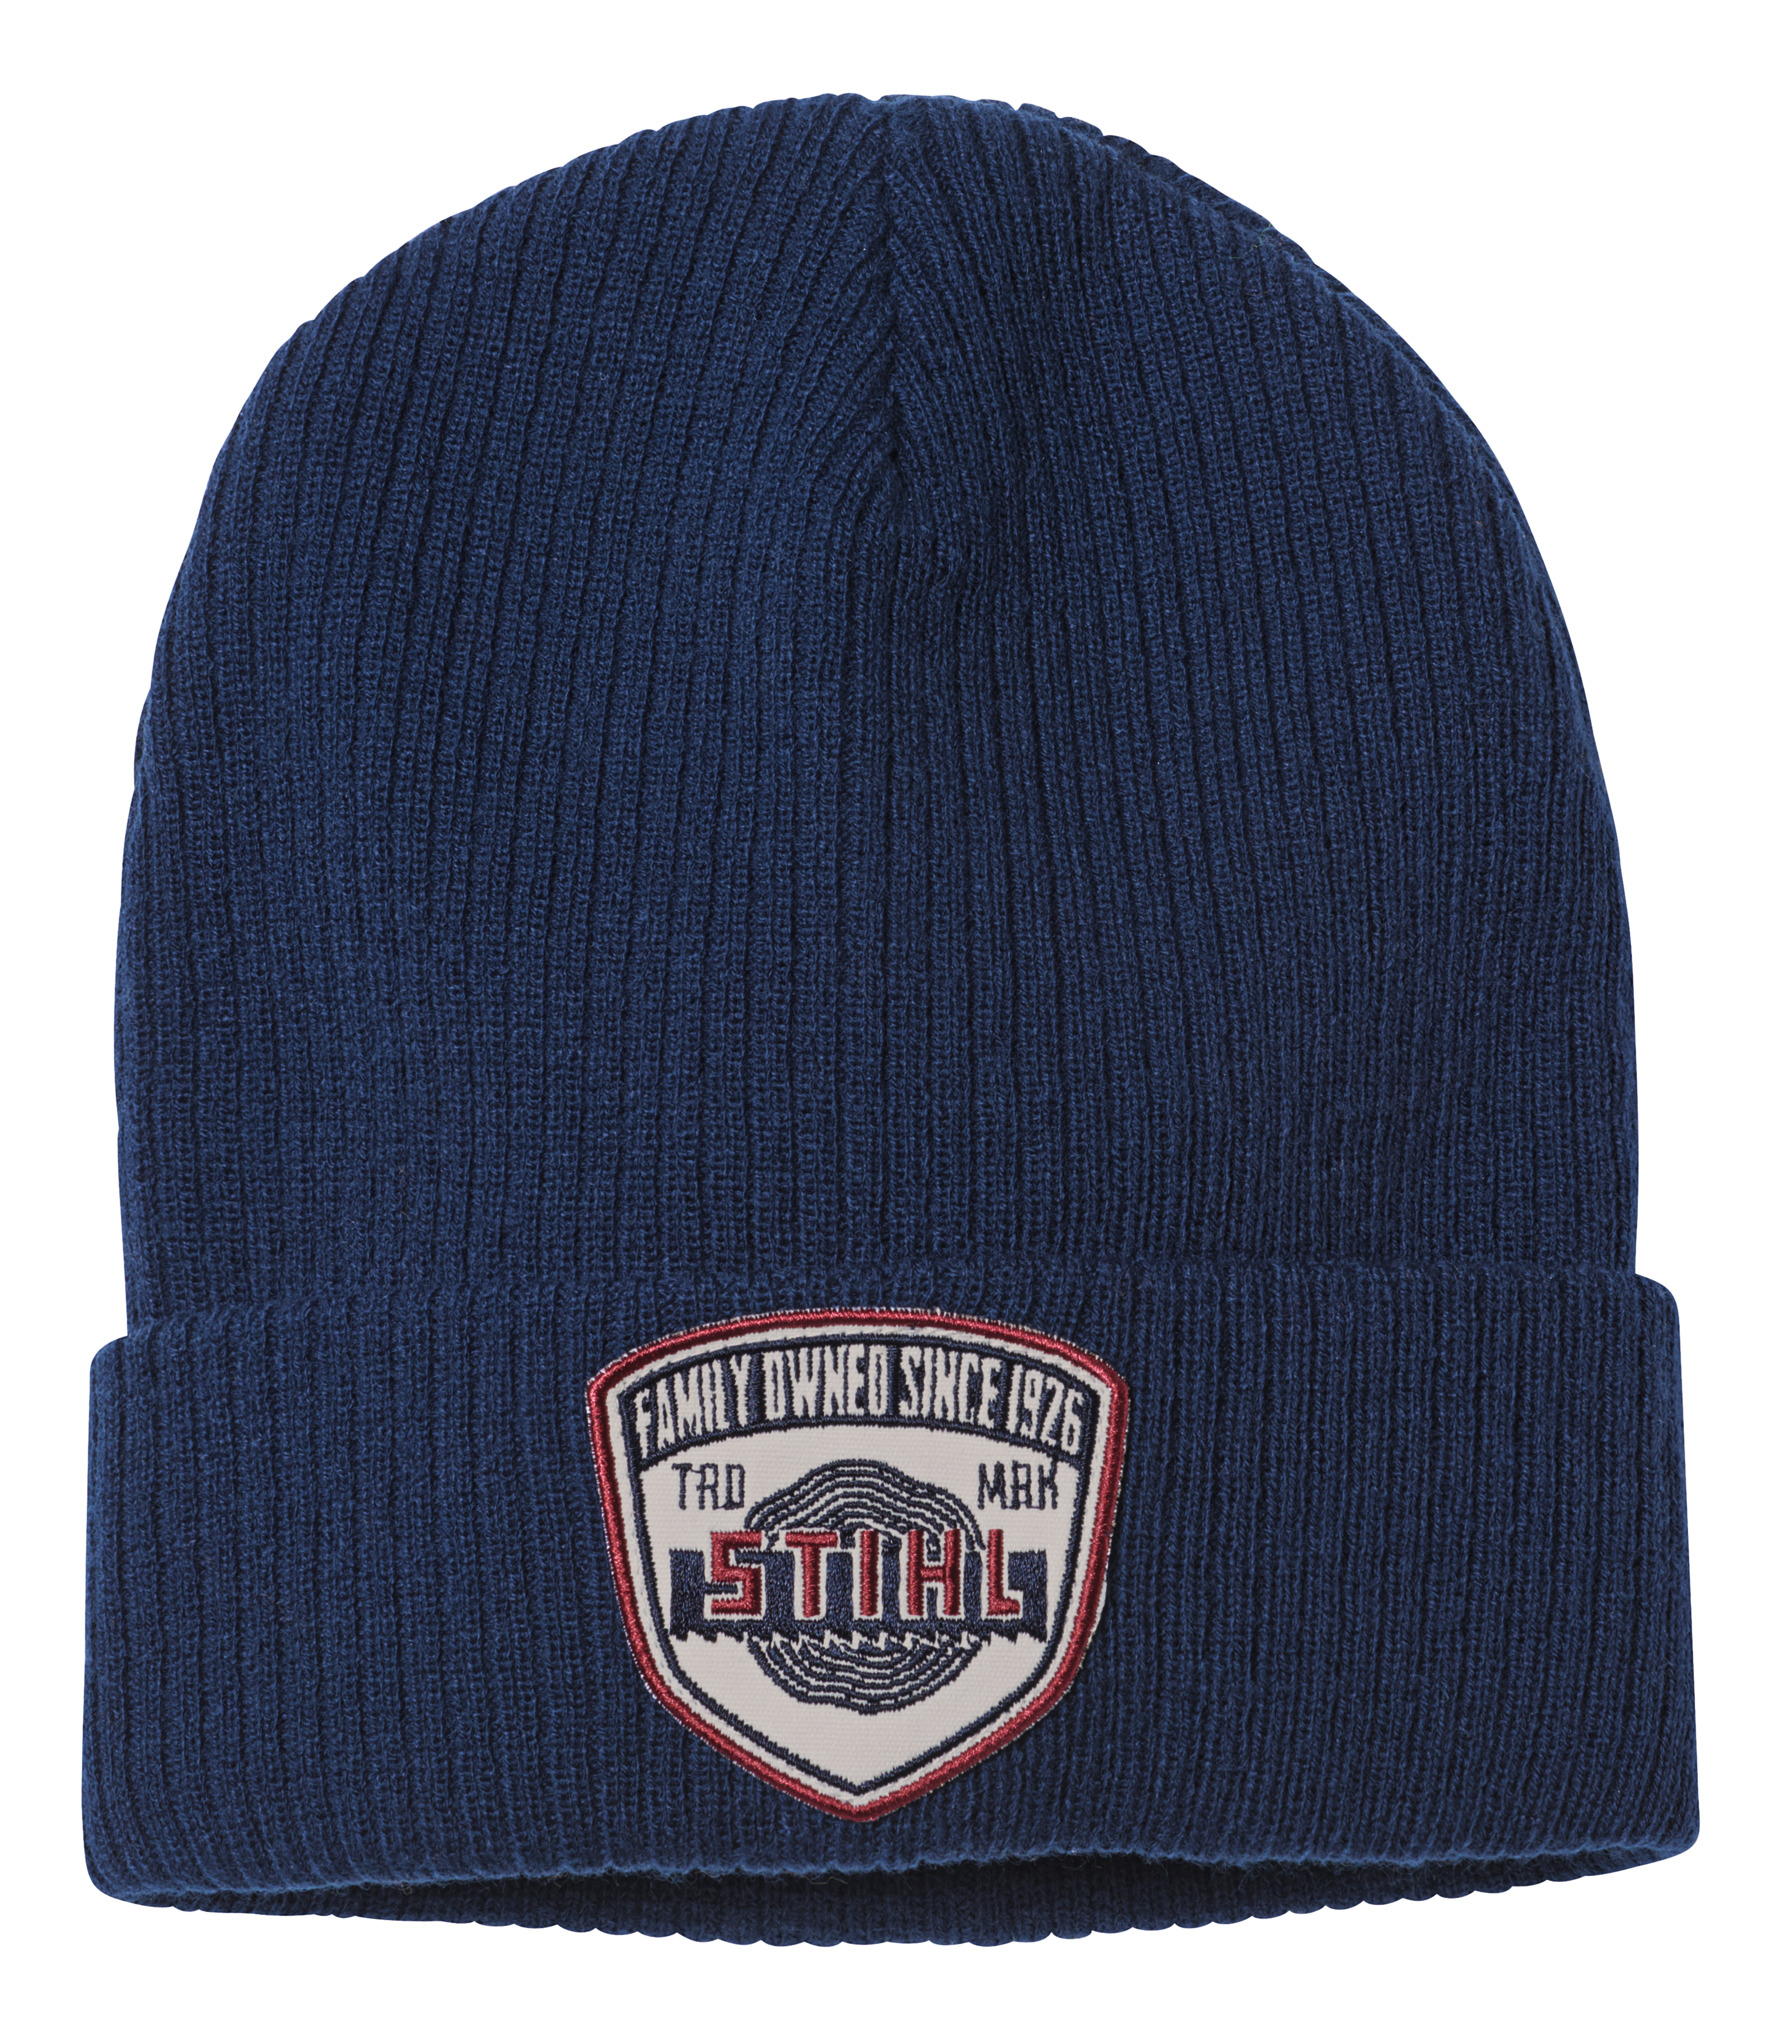 "FAMILY OWNED" beanie